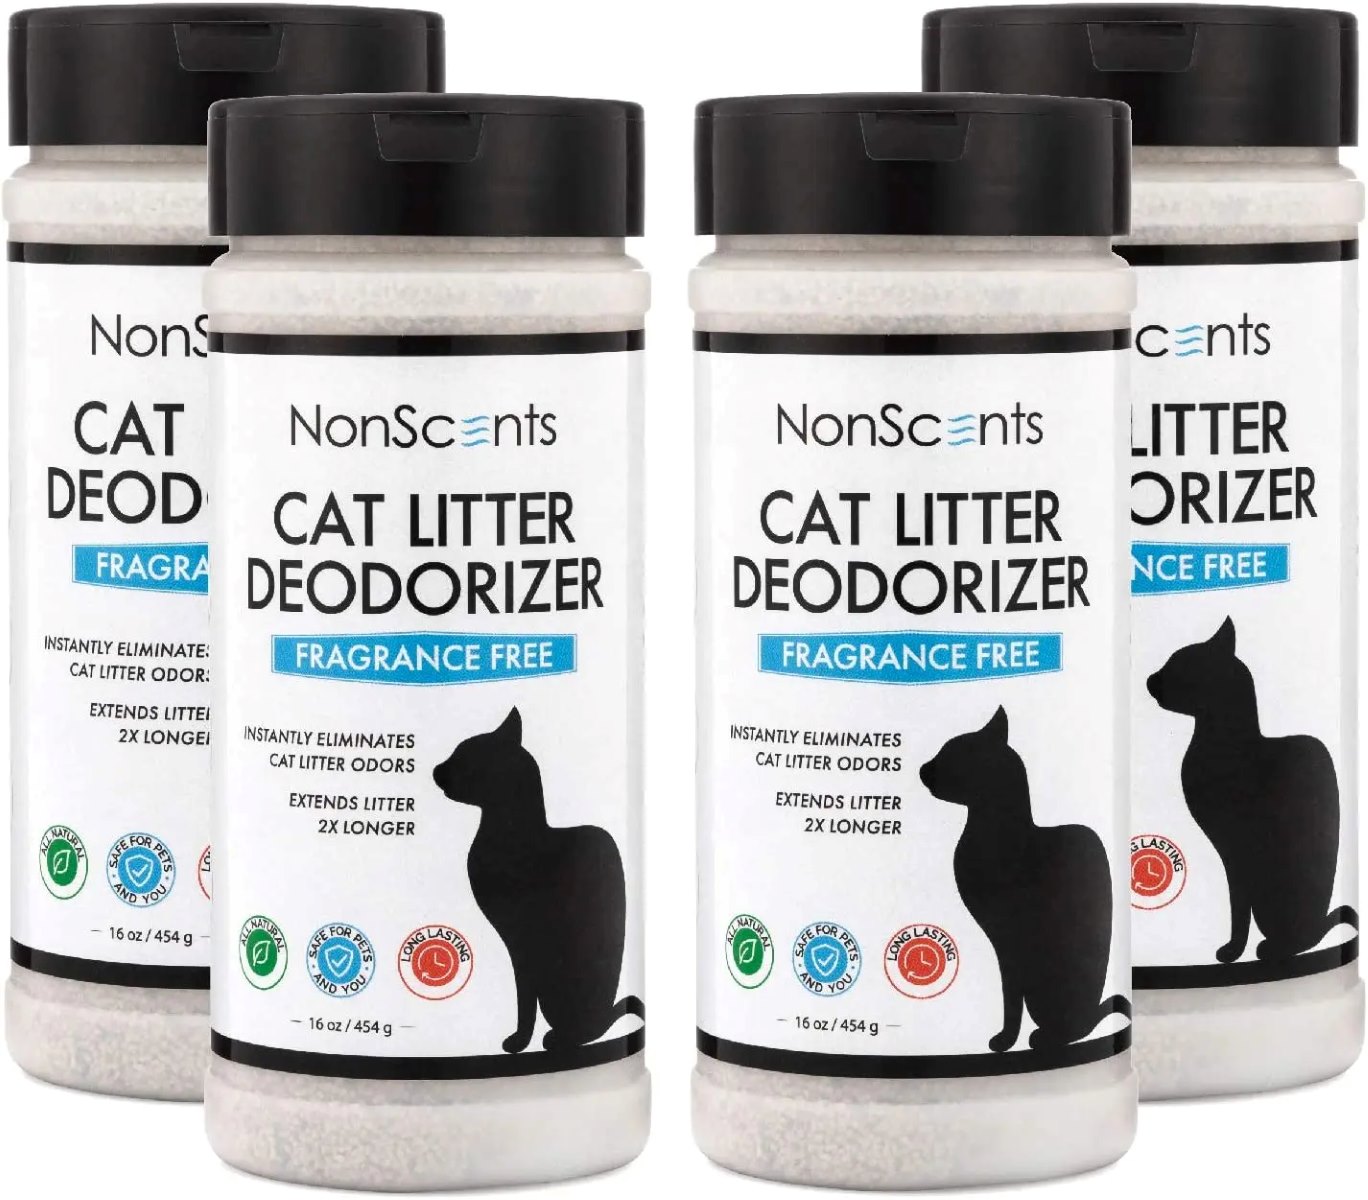 What Is The Best Cat Deodorizer